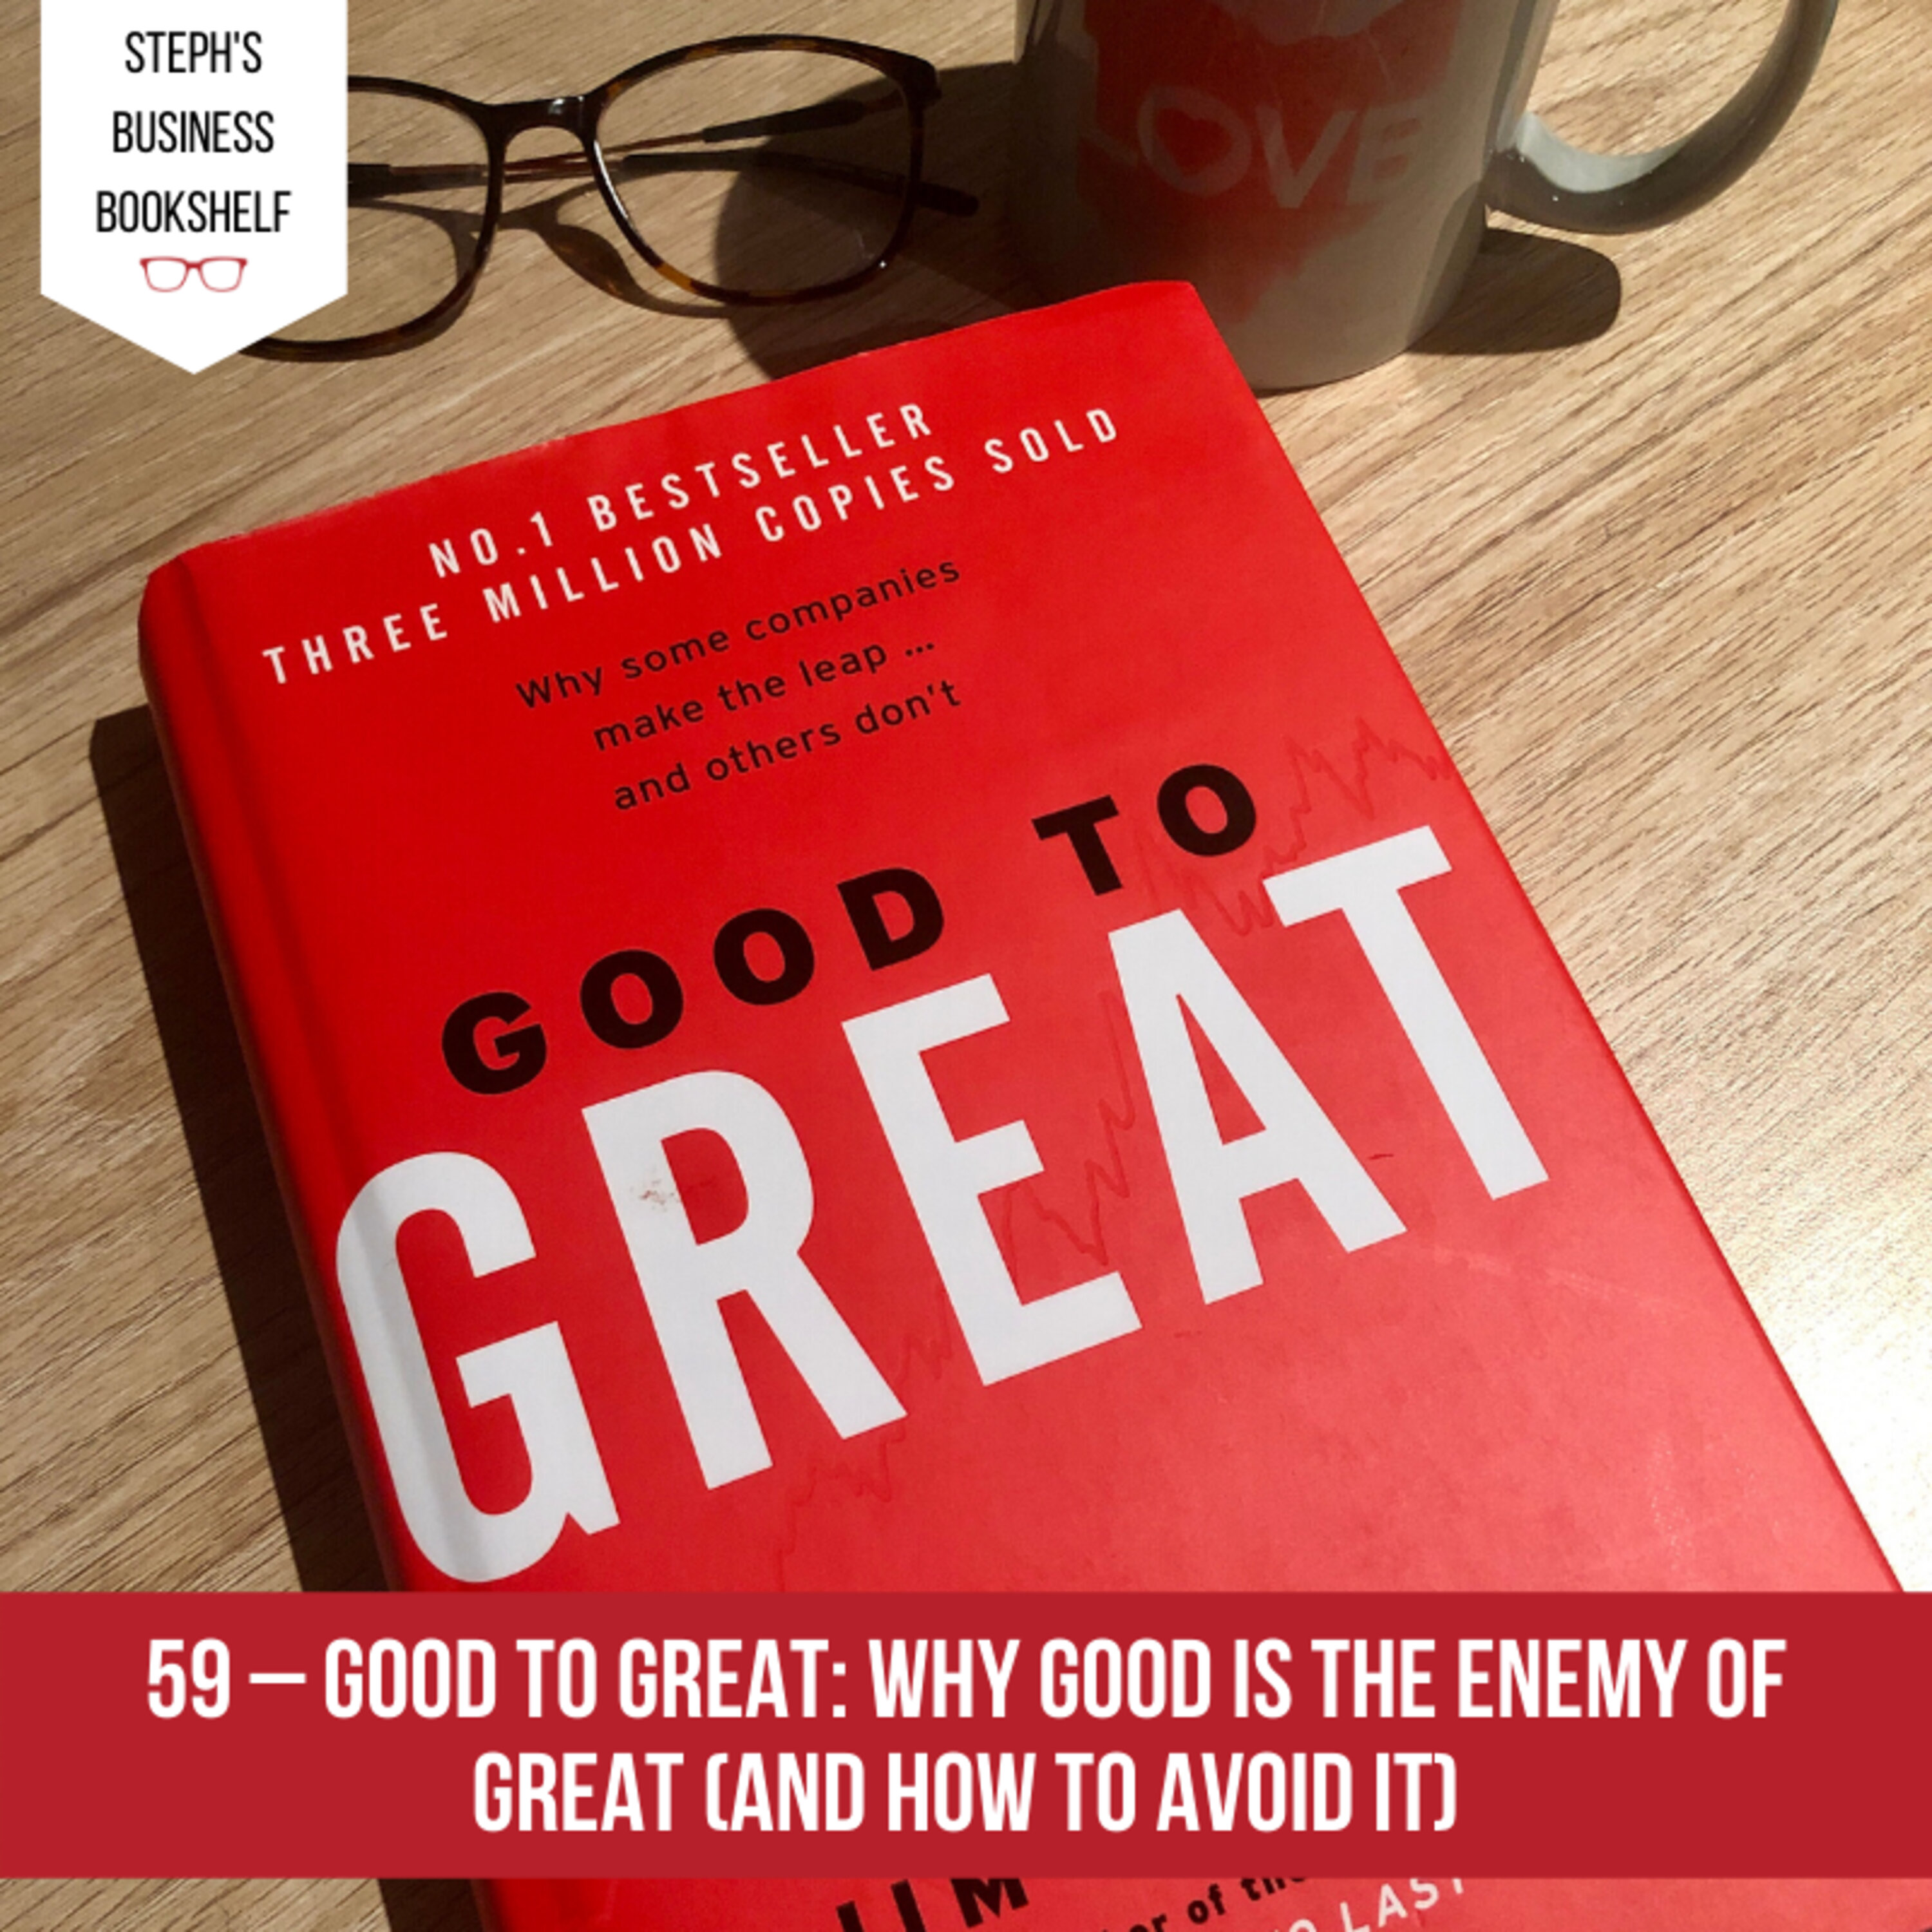 Good to Great by Jim Collins: Why good is the enemy of great (and how to avoid it) Image